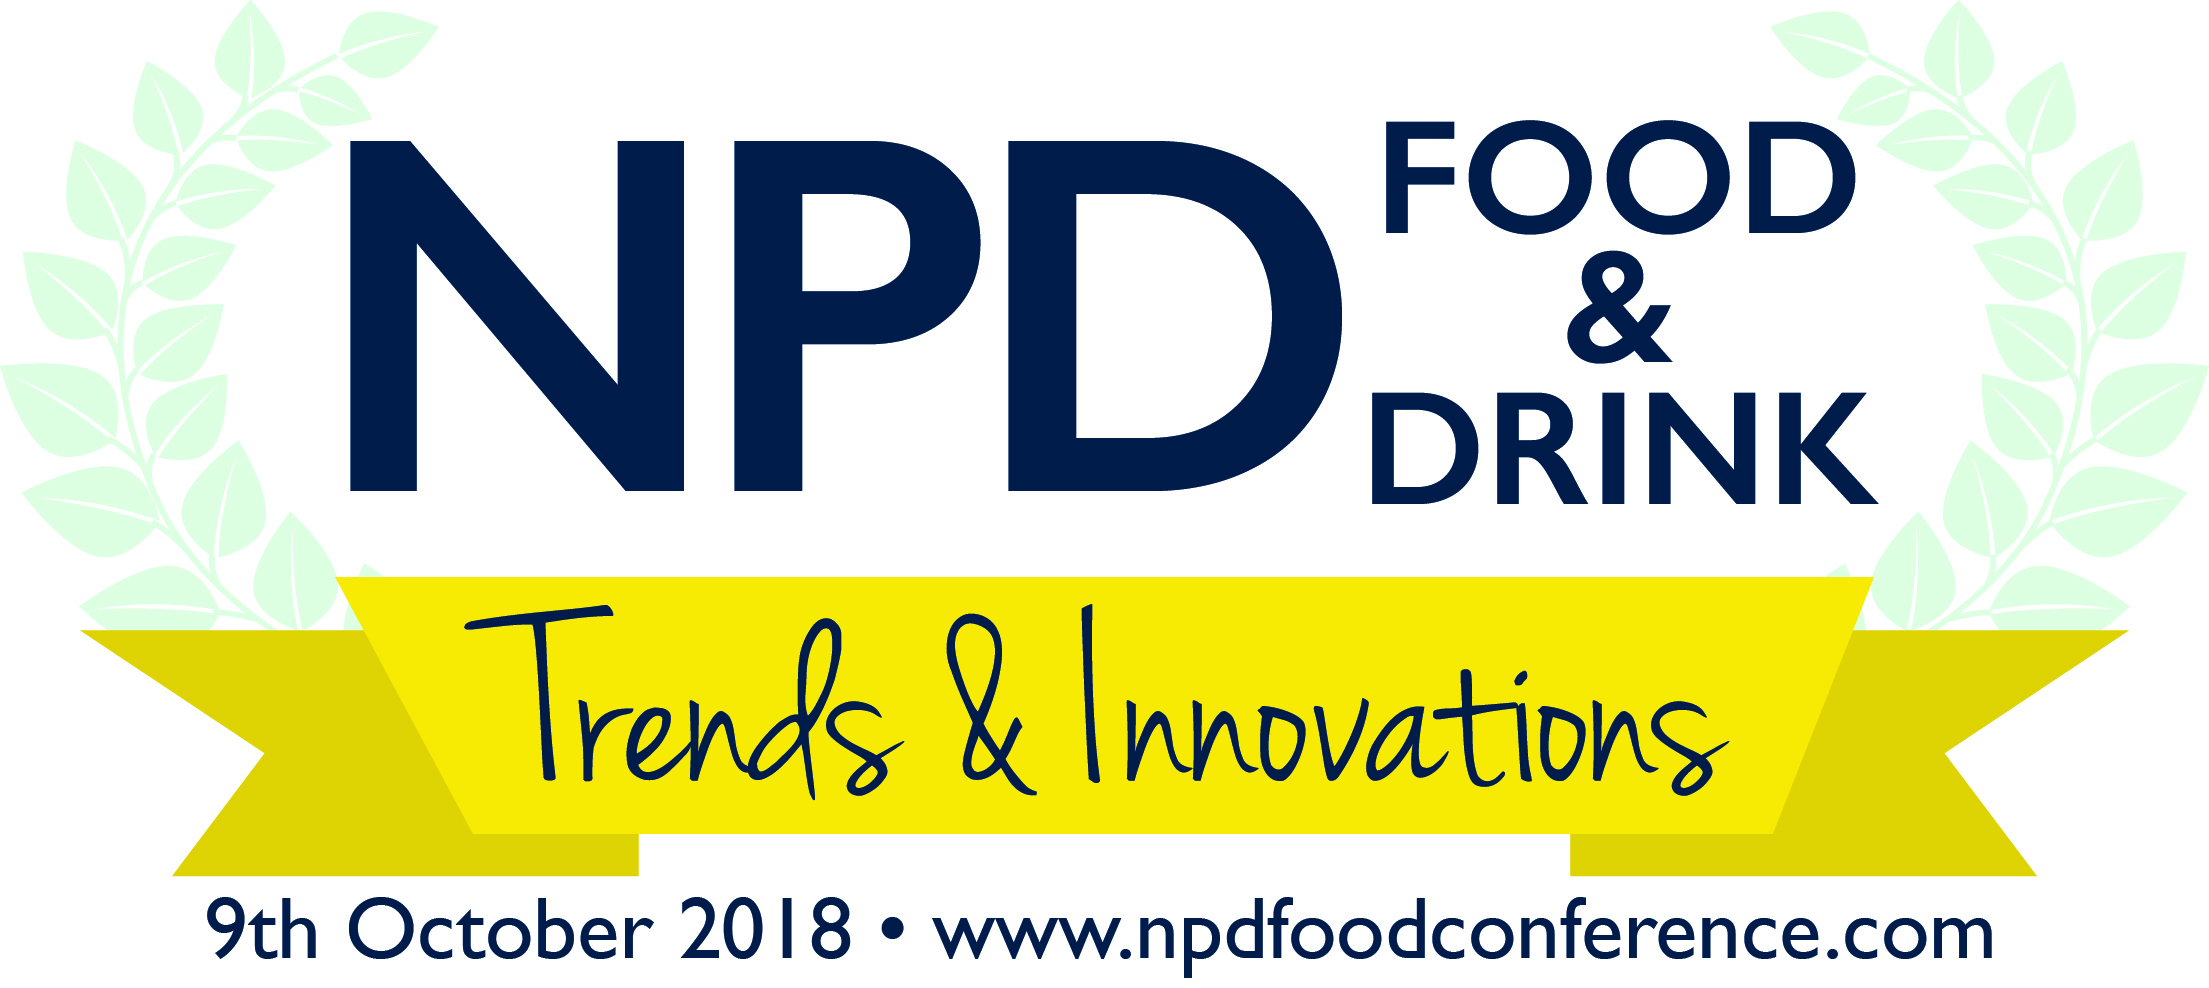 NPD Food and Drink Trends Conference